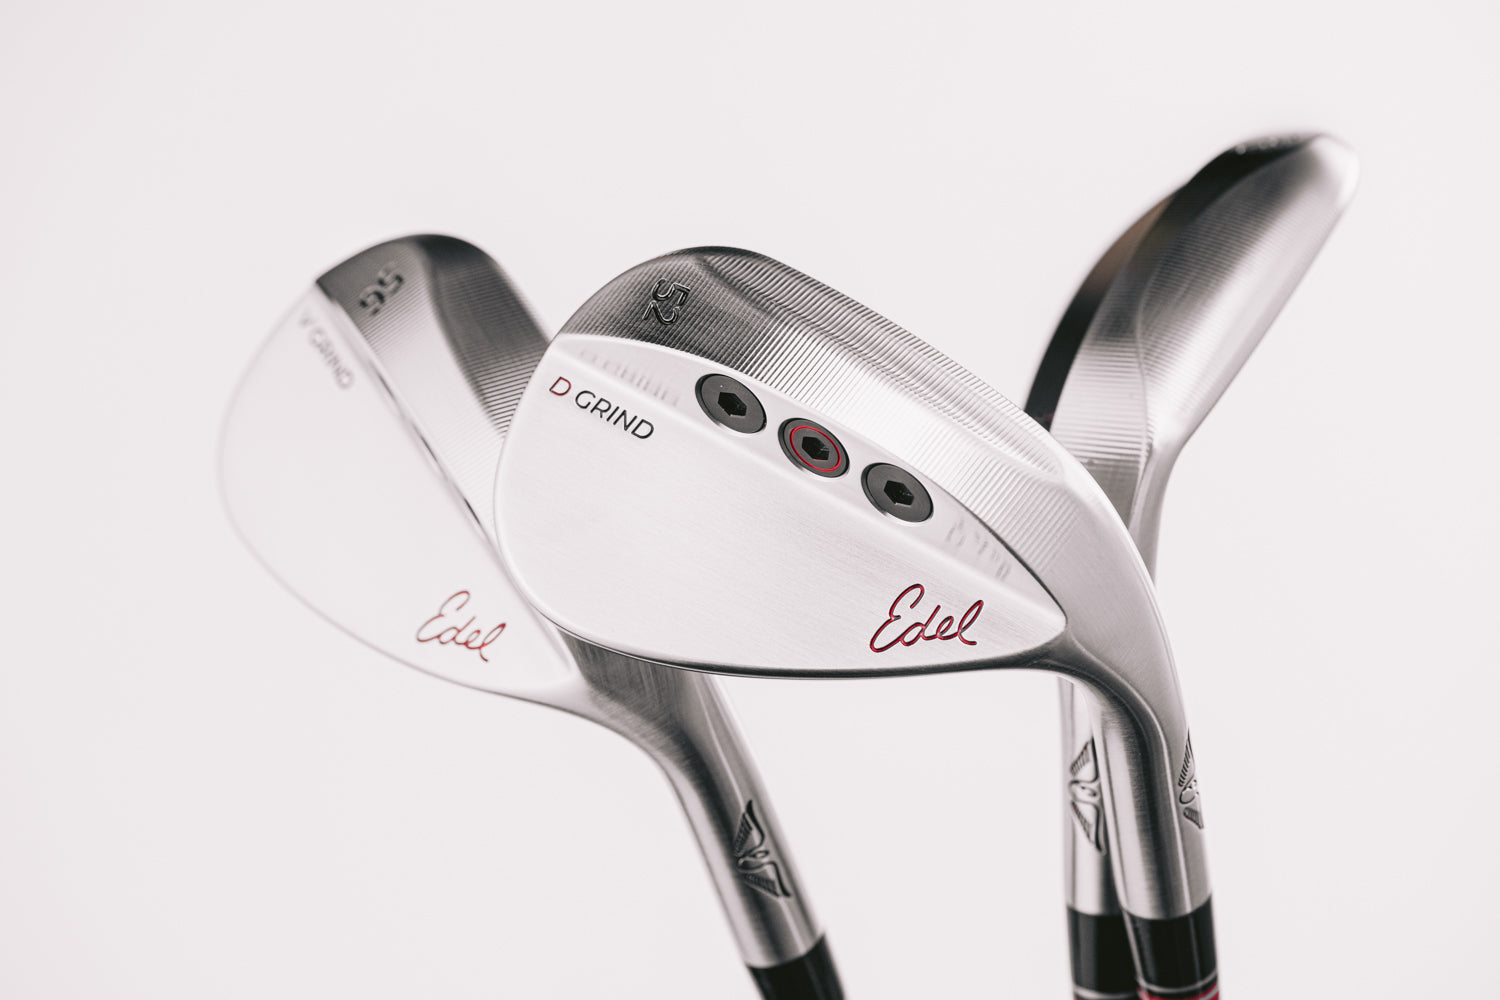 Edel Golf Custom Wedges by The Golf Tailor